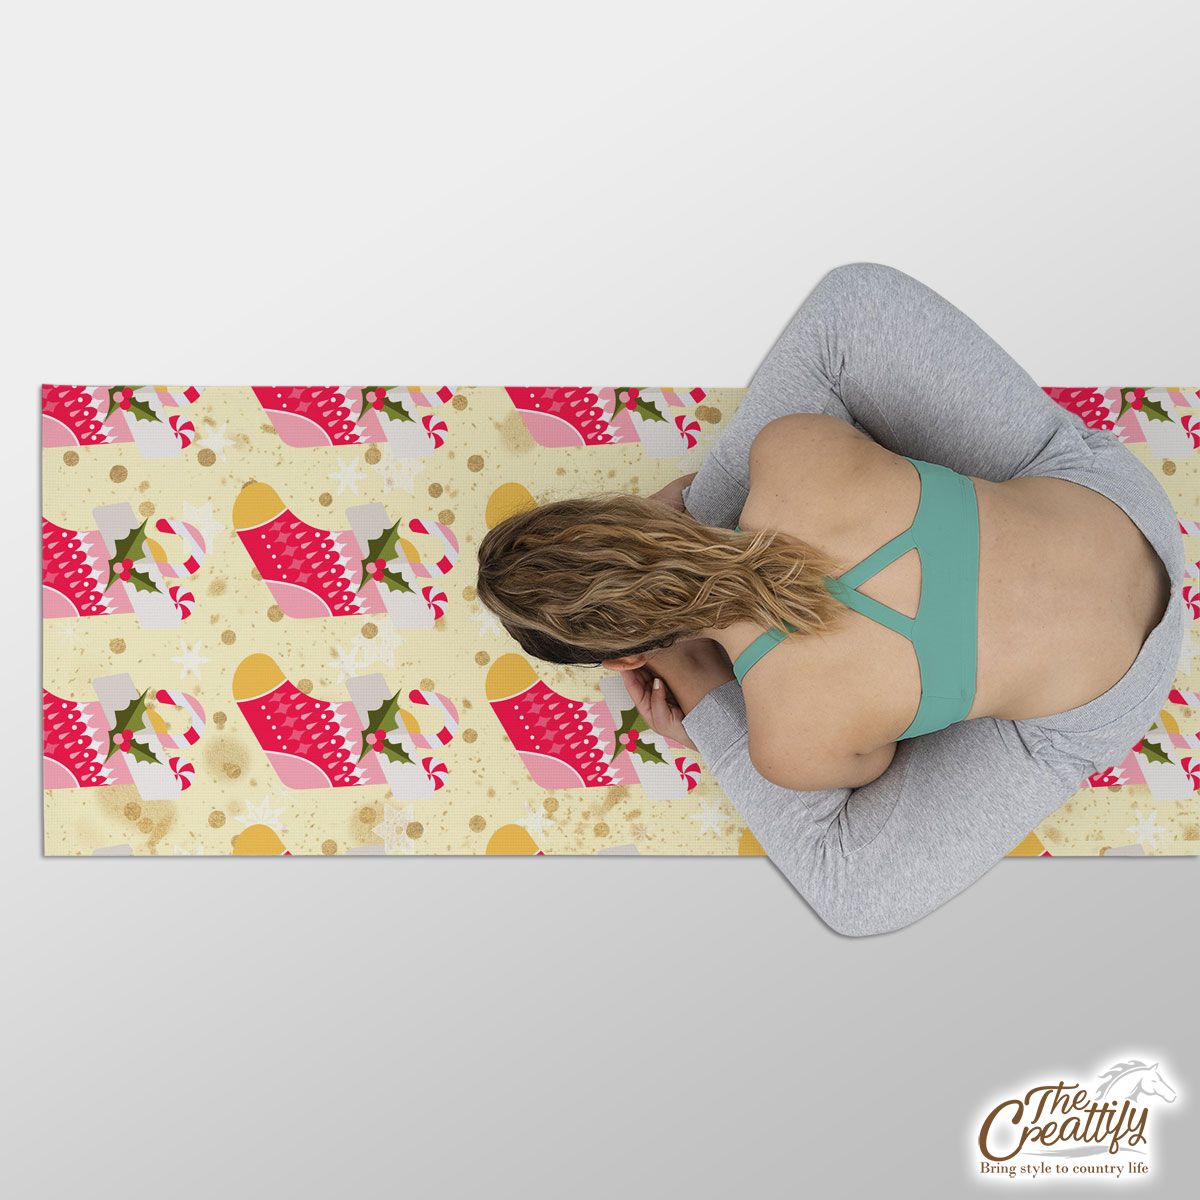 Red Socks, Christmas Socks With Candy Canes Yoga Mat